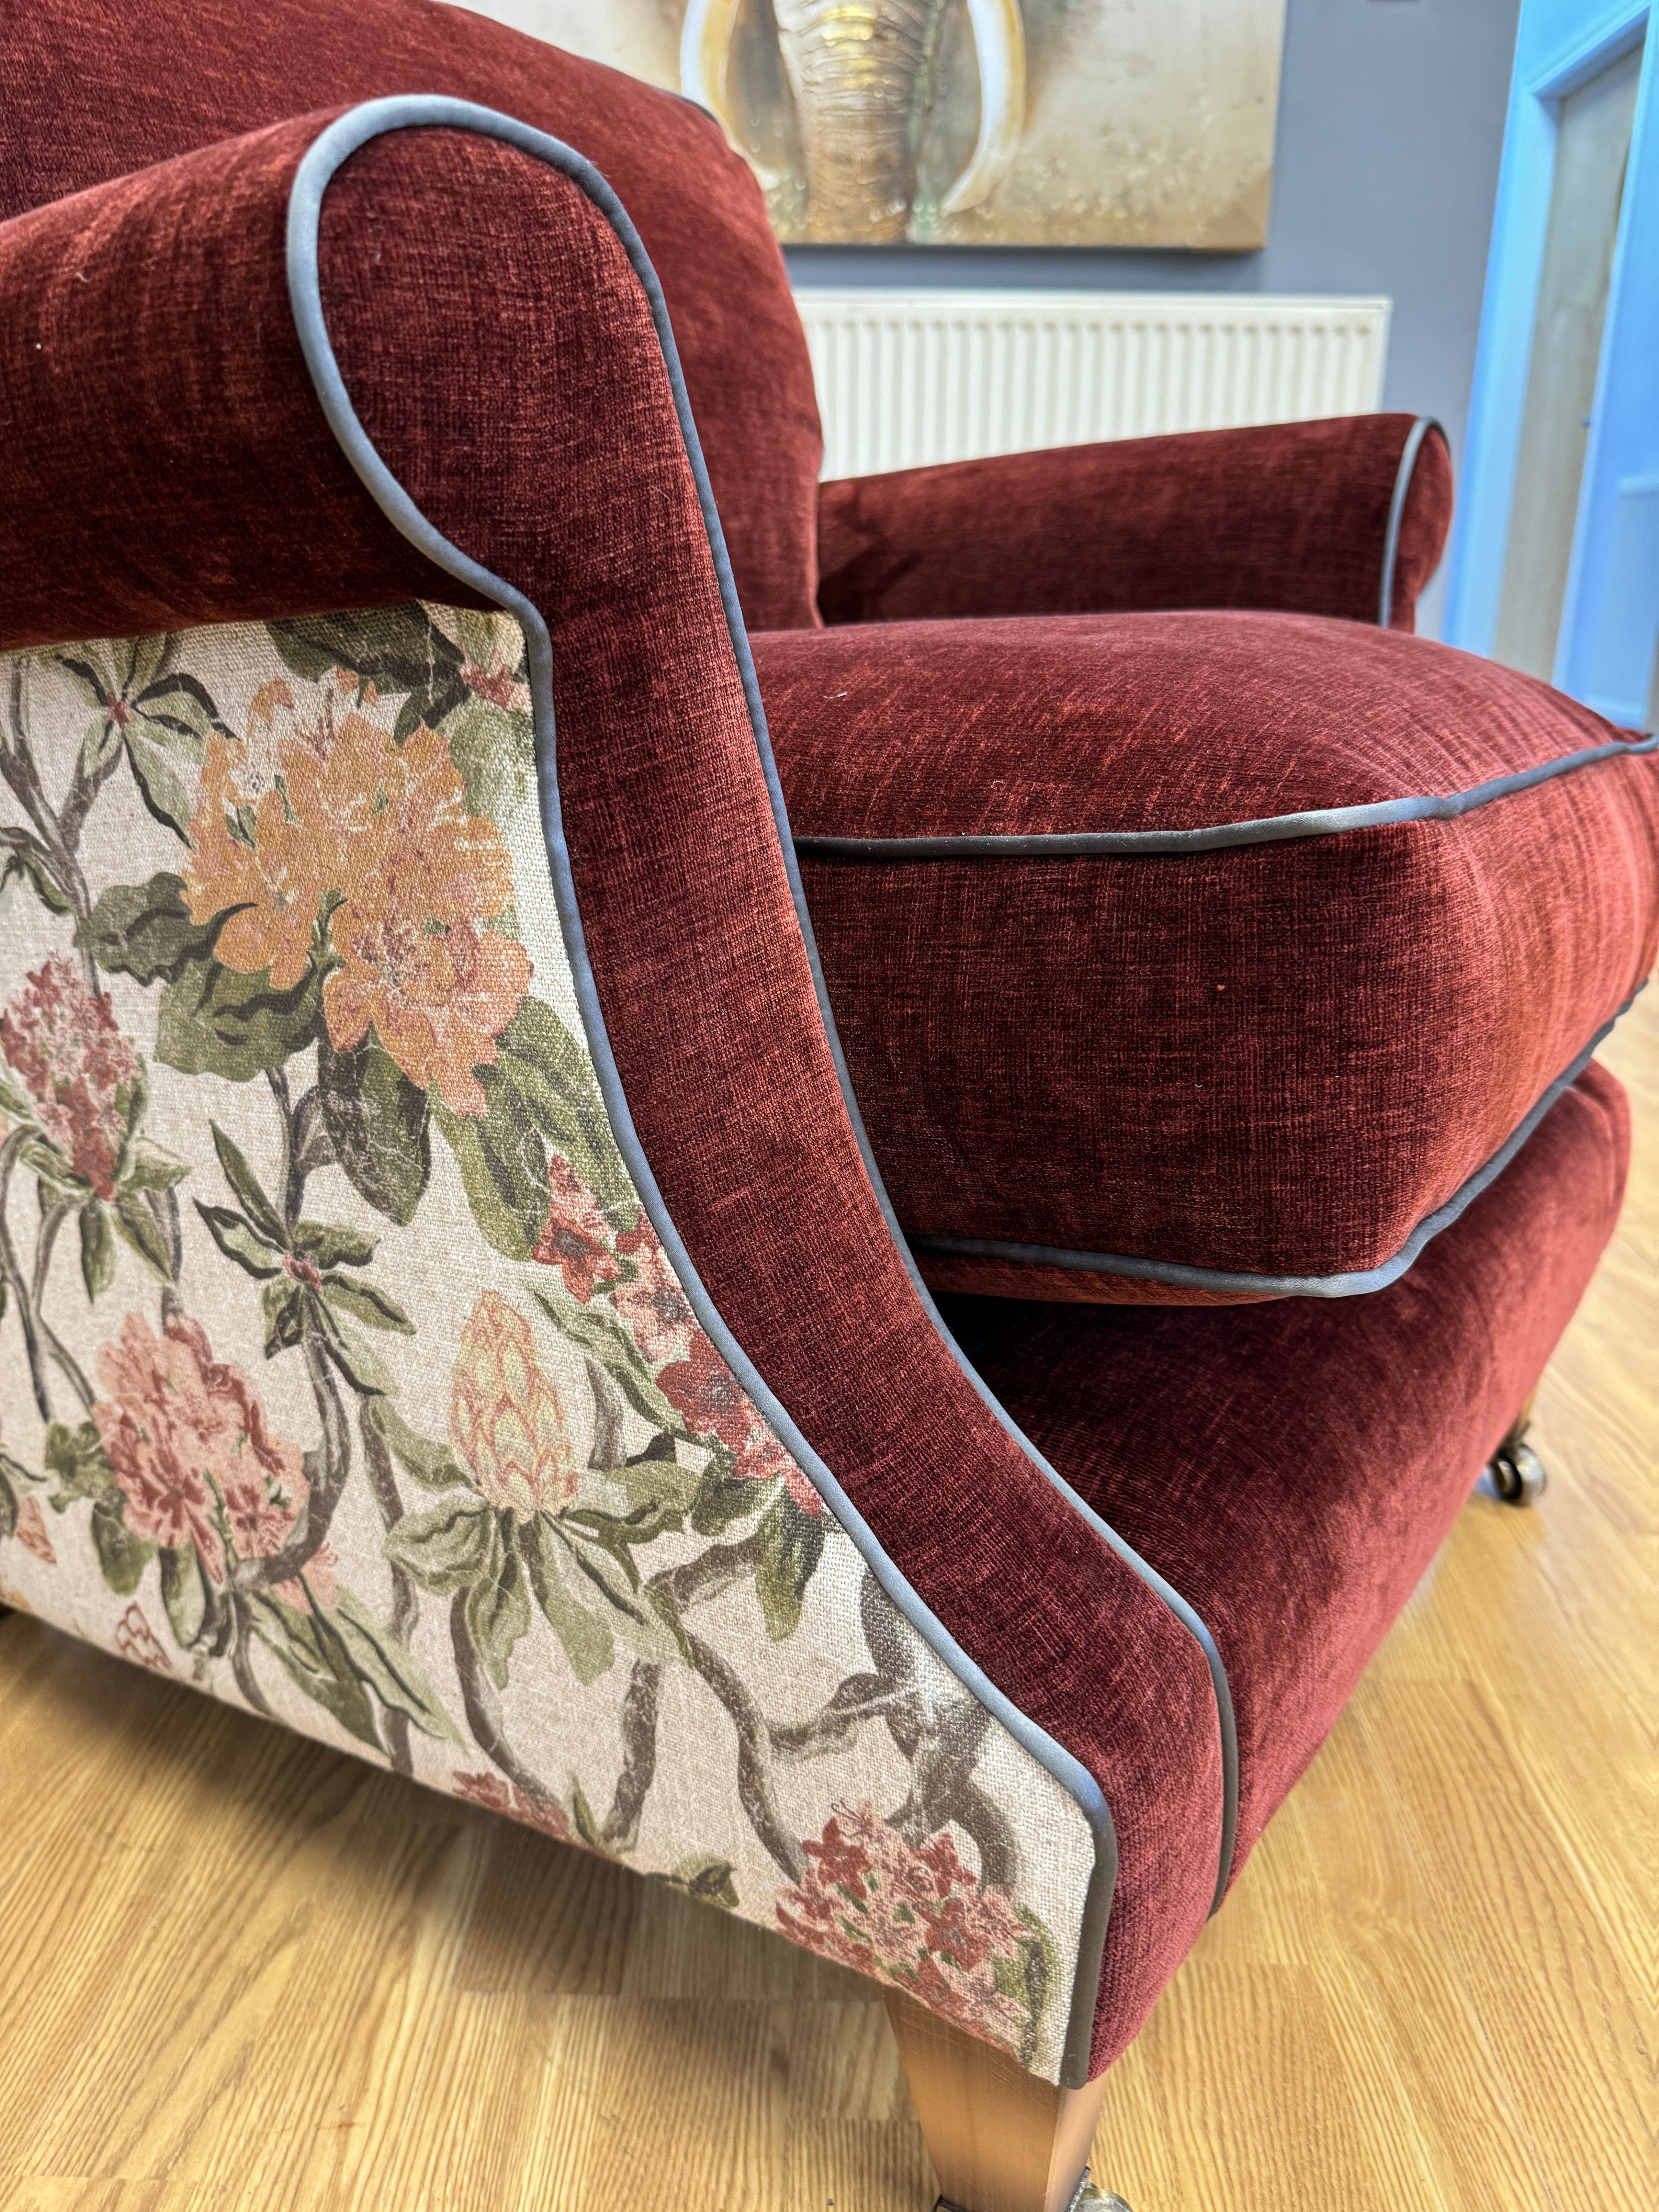 SOFAS & STUFF Cooksbridge accent chair in Red velvet & linen floral outer cover